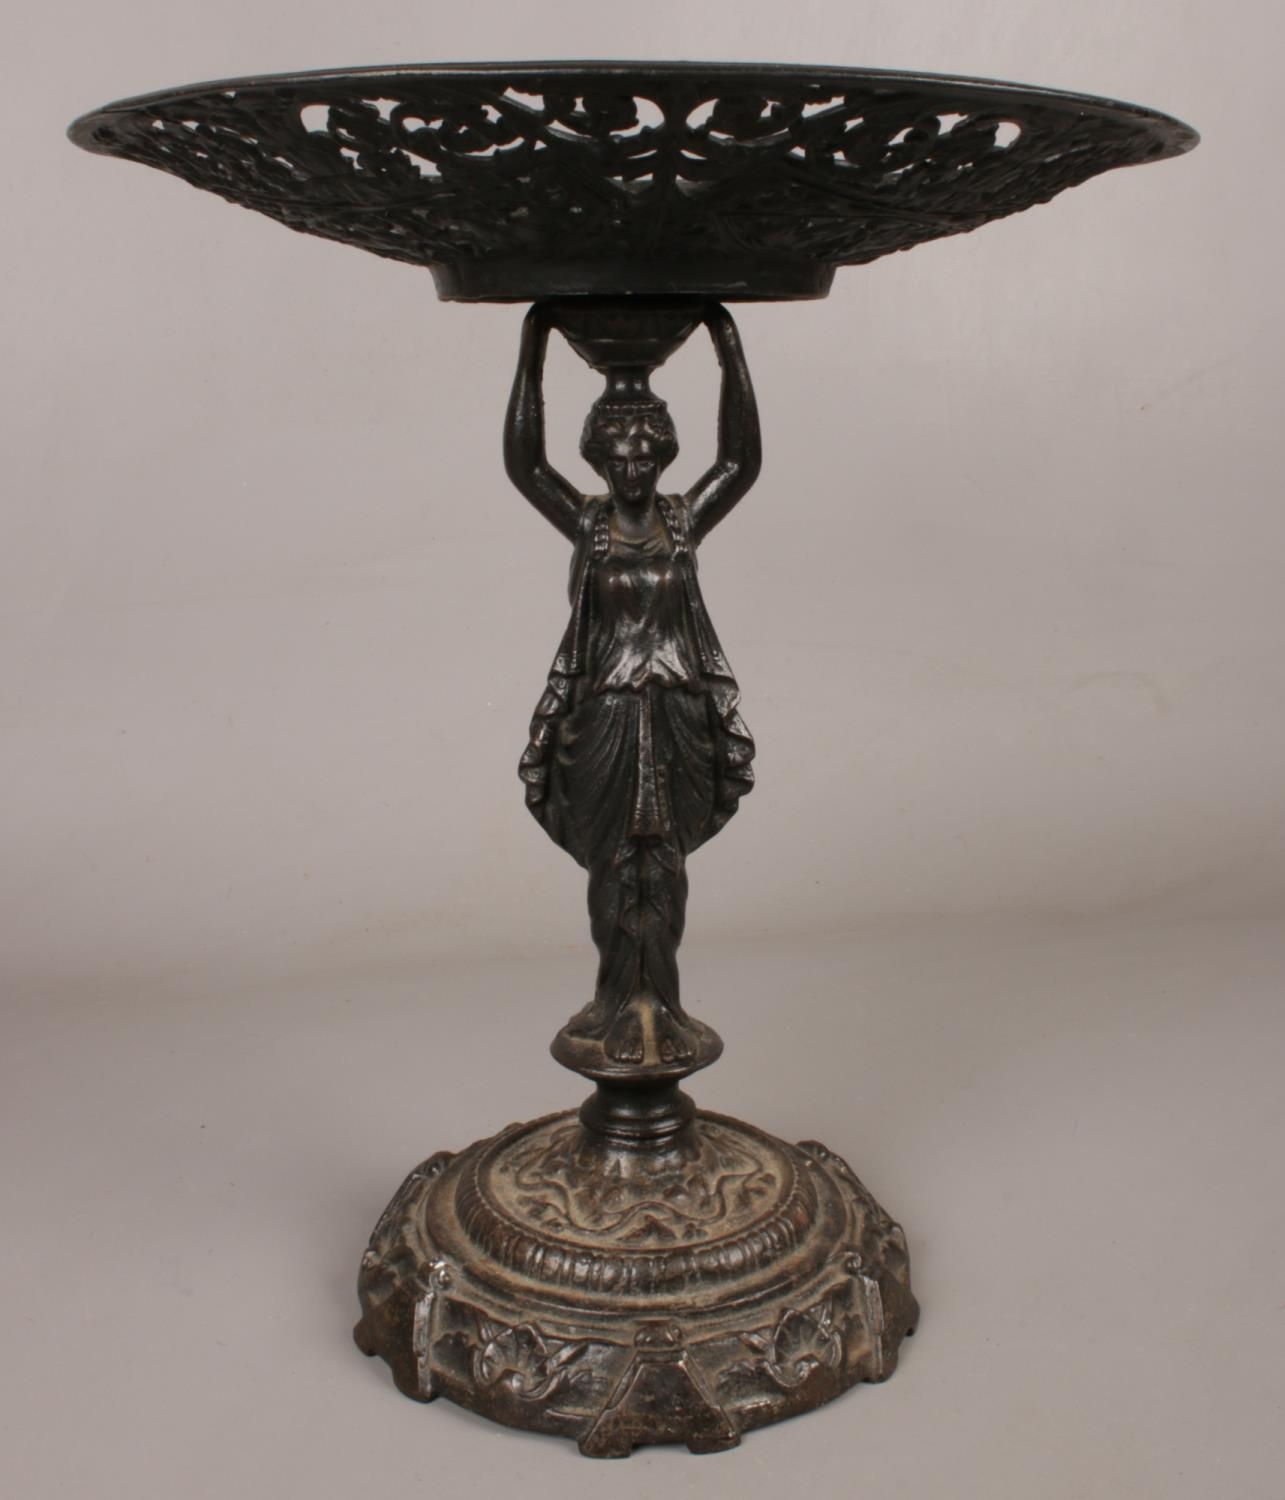 A cast iron 'Lady Tessa' centrepiece. Decorated in a classical style. H: 34cm, W: 29cm. Condition